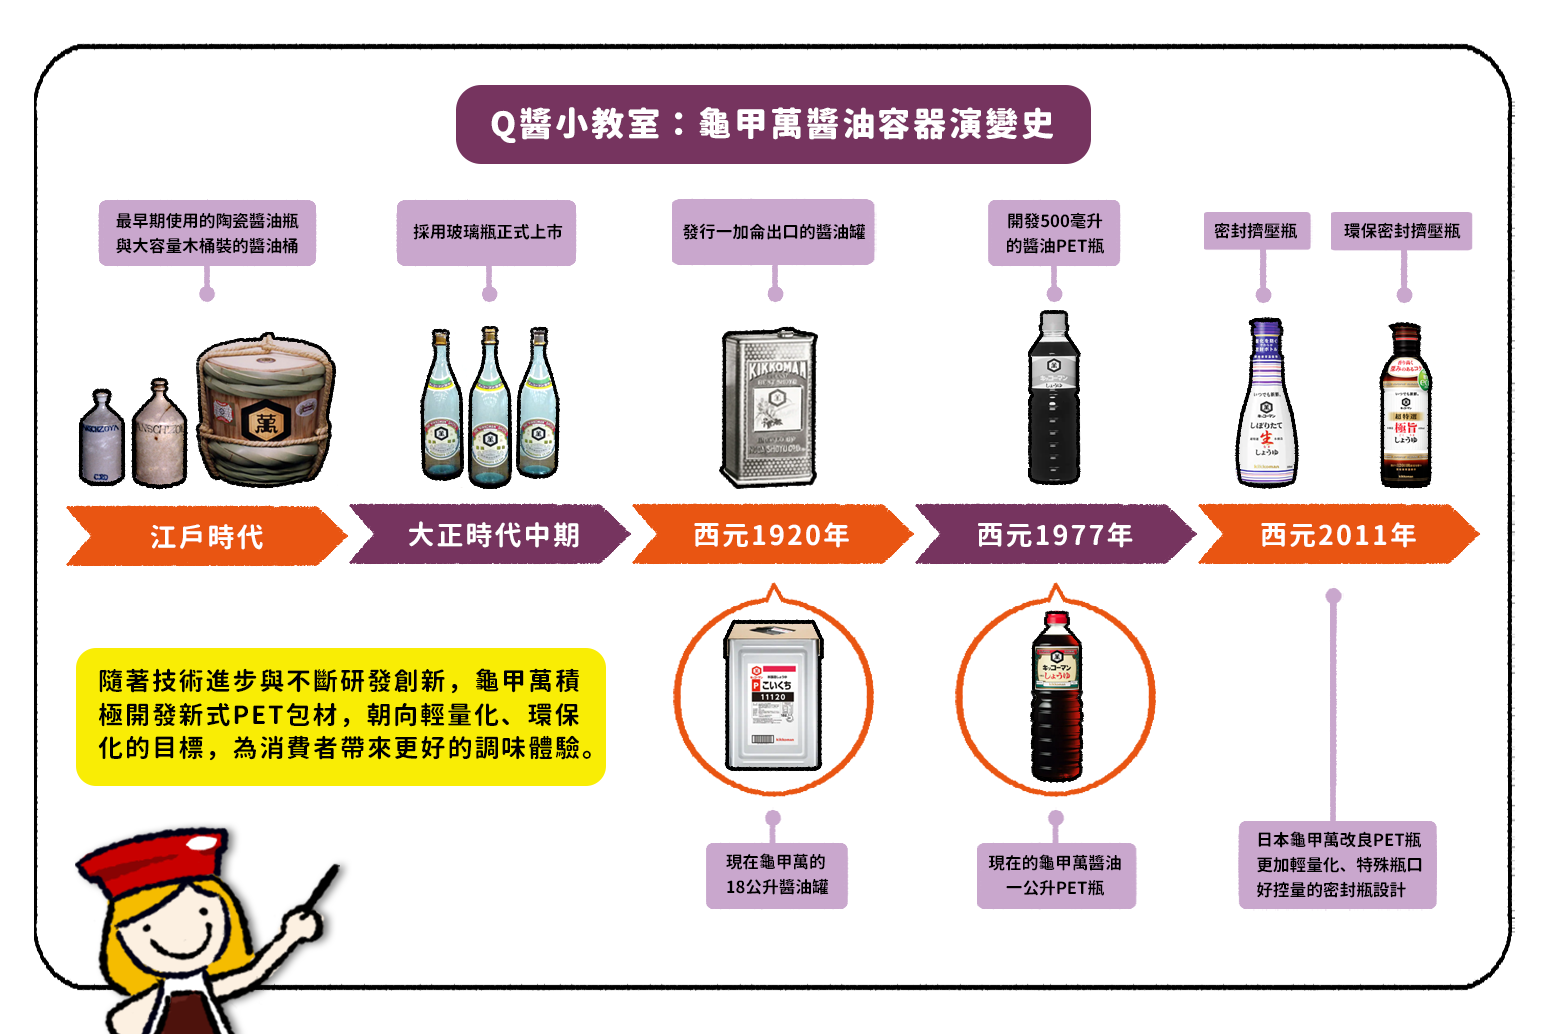 Picture_Evolution History of the soy sauce container_V2